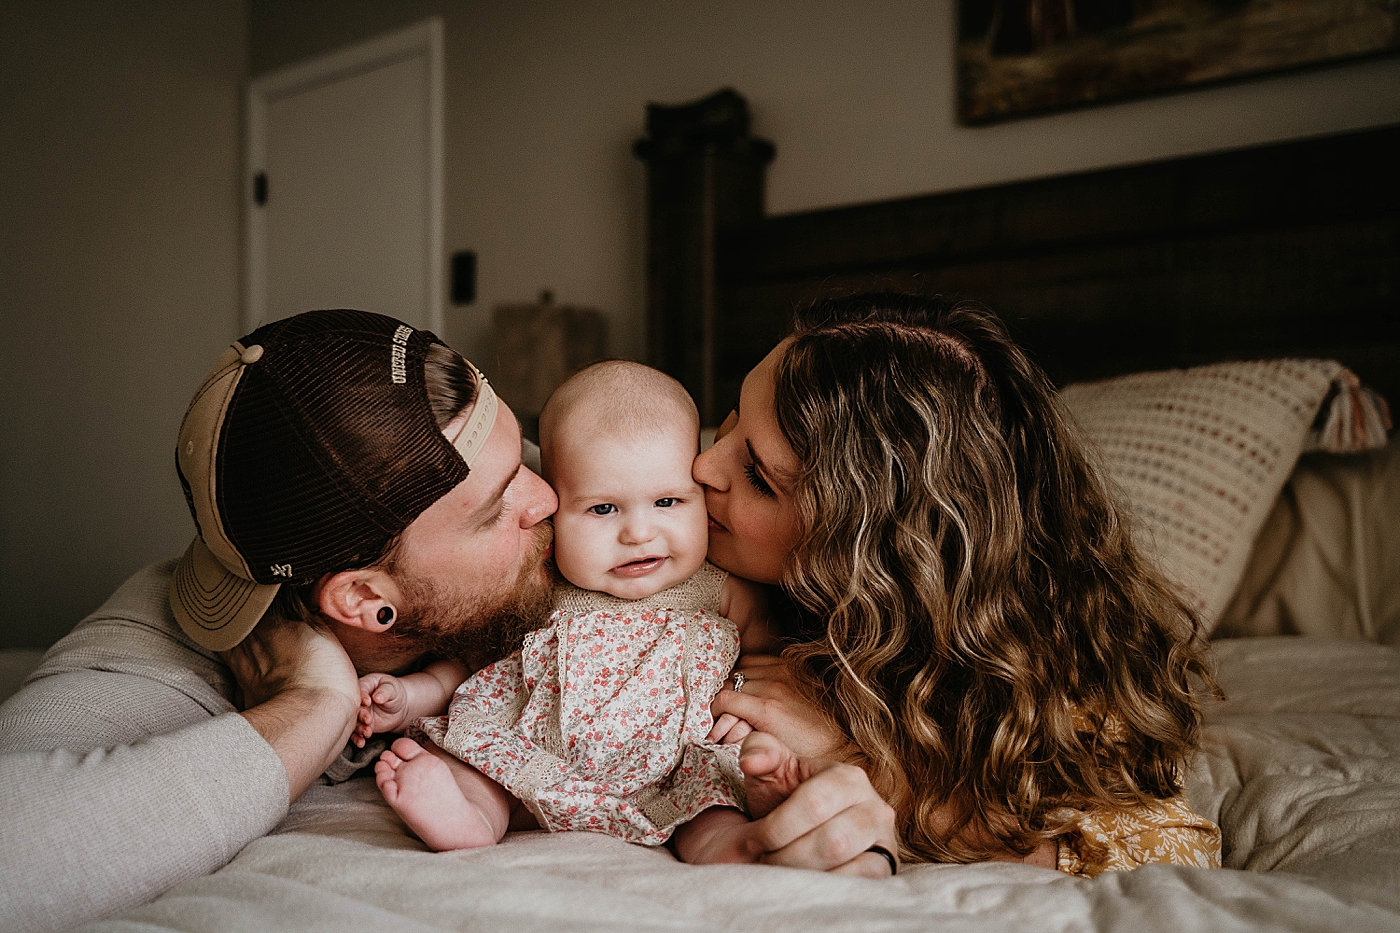 Mom and Dad kissing baby on each cheek At Home South Florida Family Photography captured by South Florida Family Photographer Krystal Capone Photography 